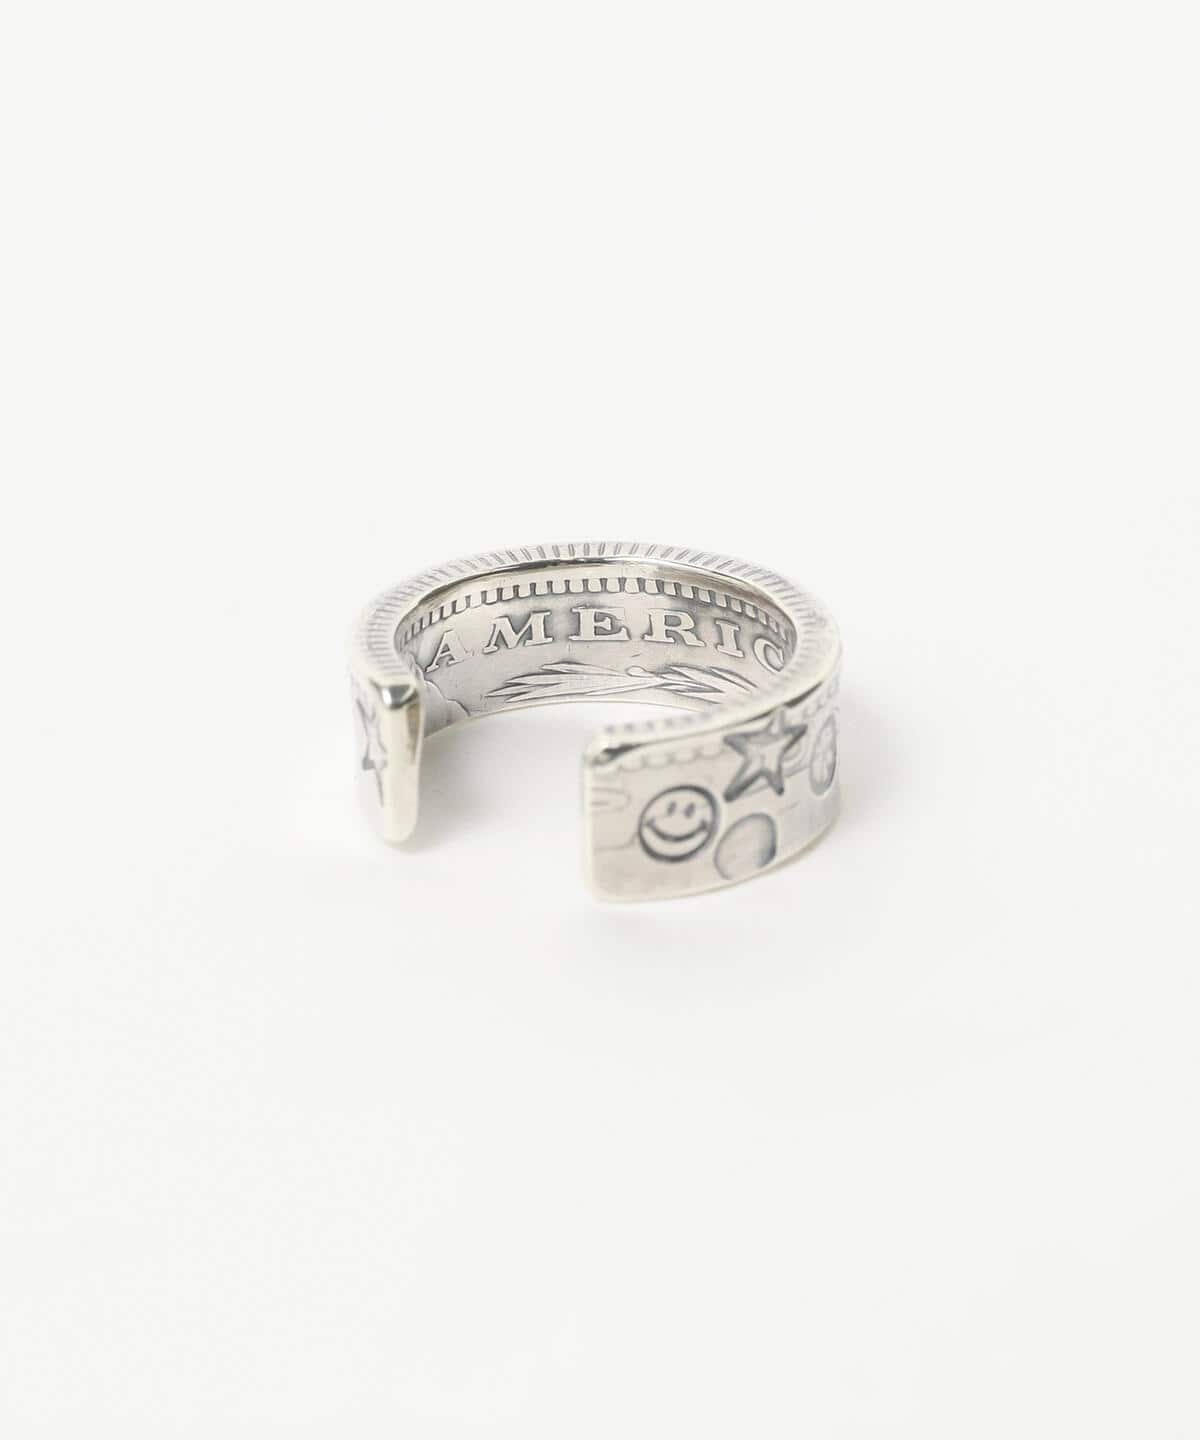 BEAMS NORTH WORKS × BEAMS / Special order 1$ Stamp ring (accessory